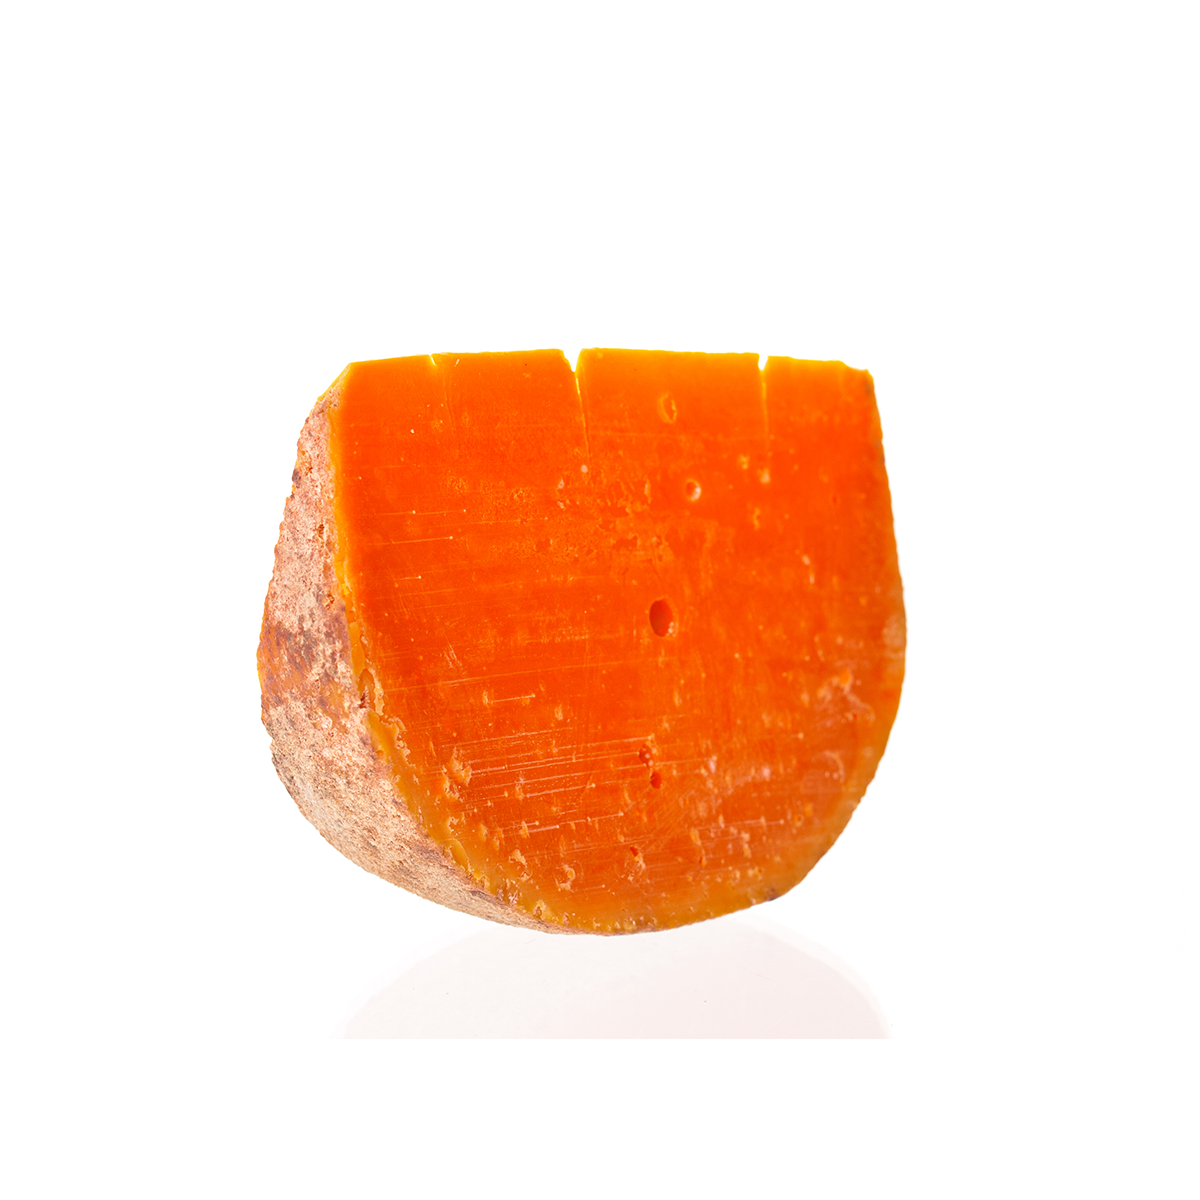 Isigny Sainte Mere Mimolette 12 Month Cheese